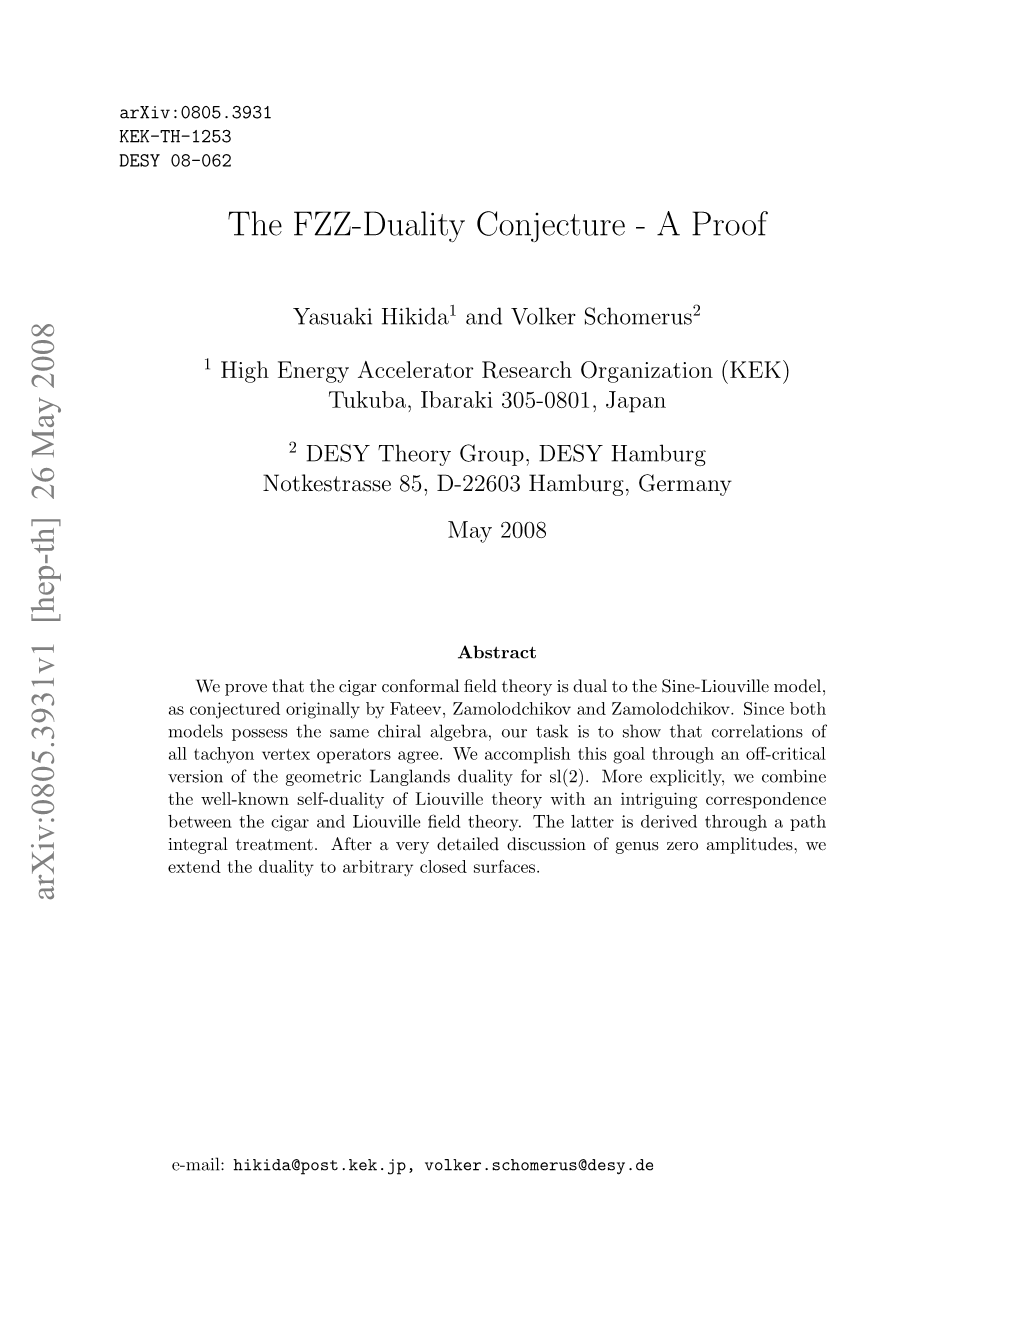 The FZZ-Duality Conjecture